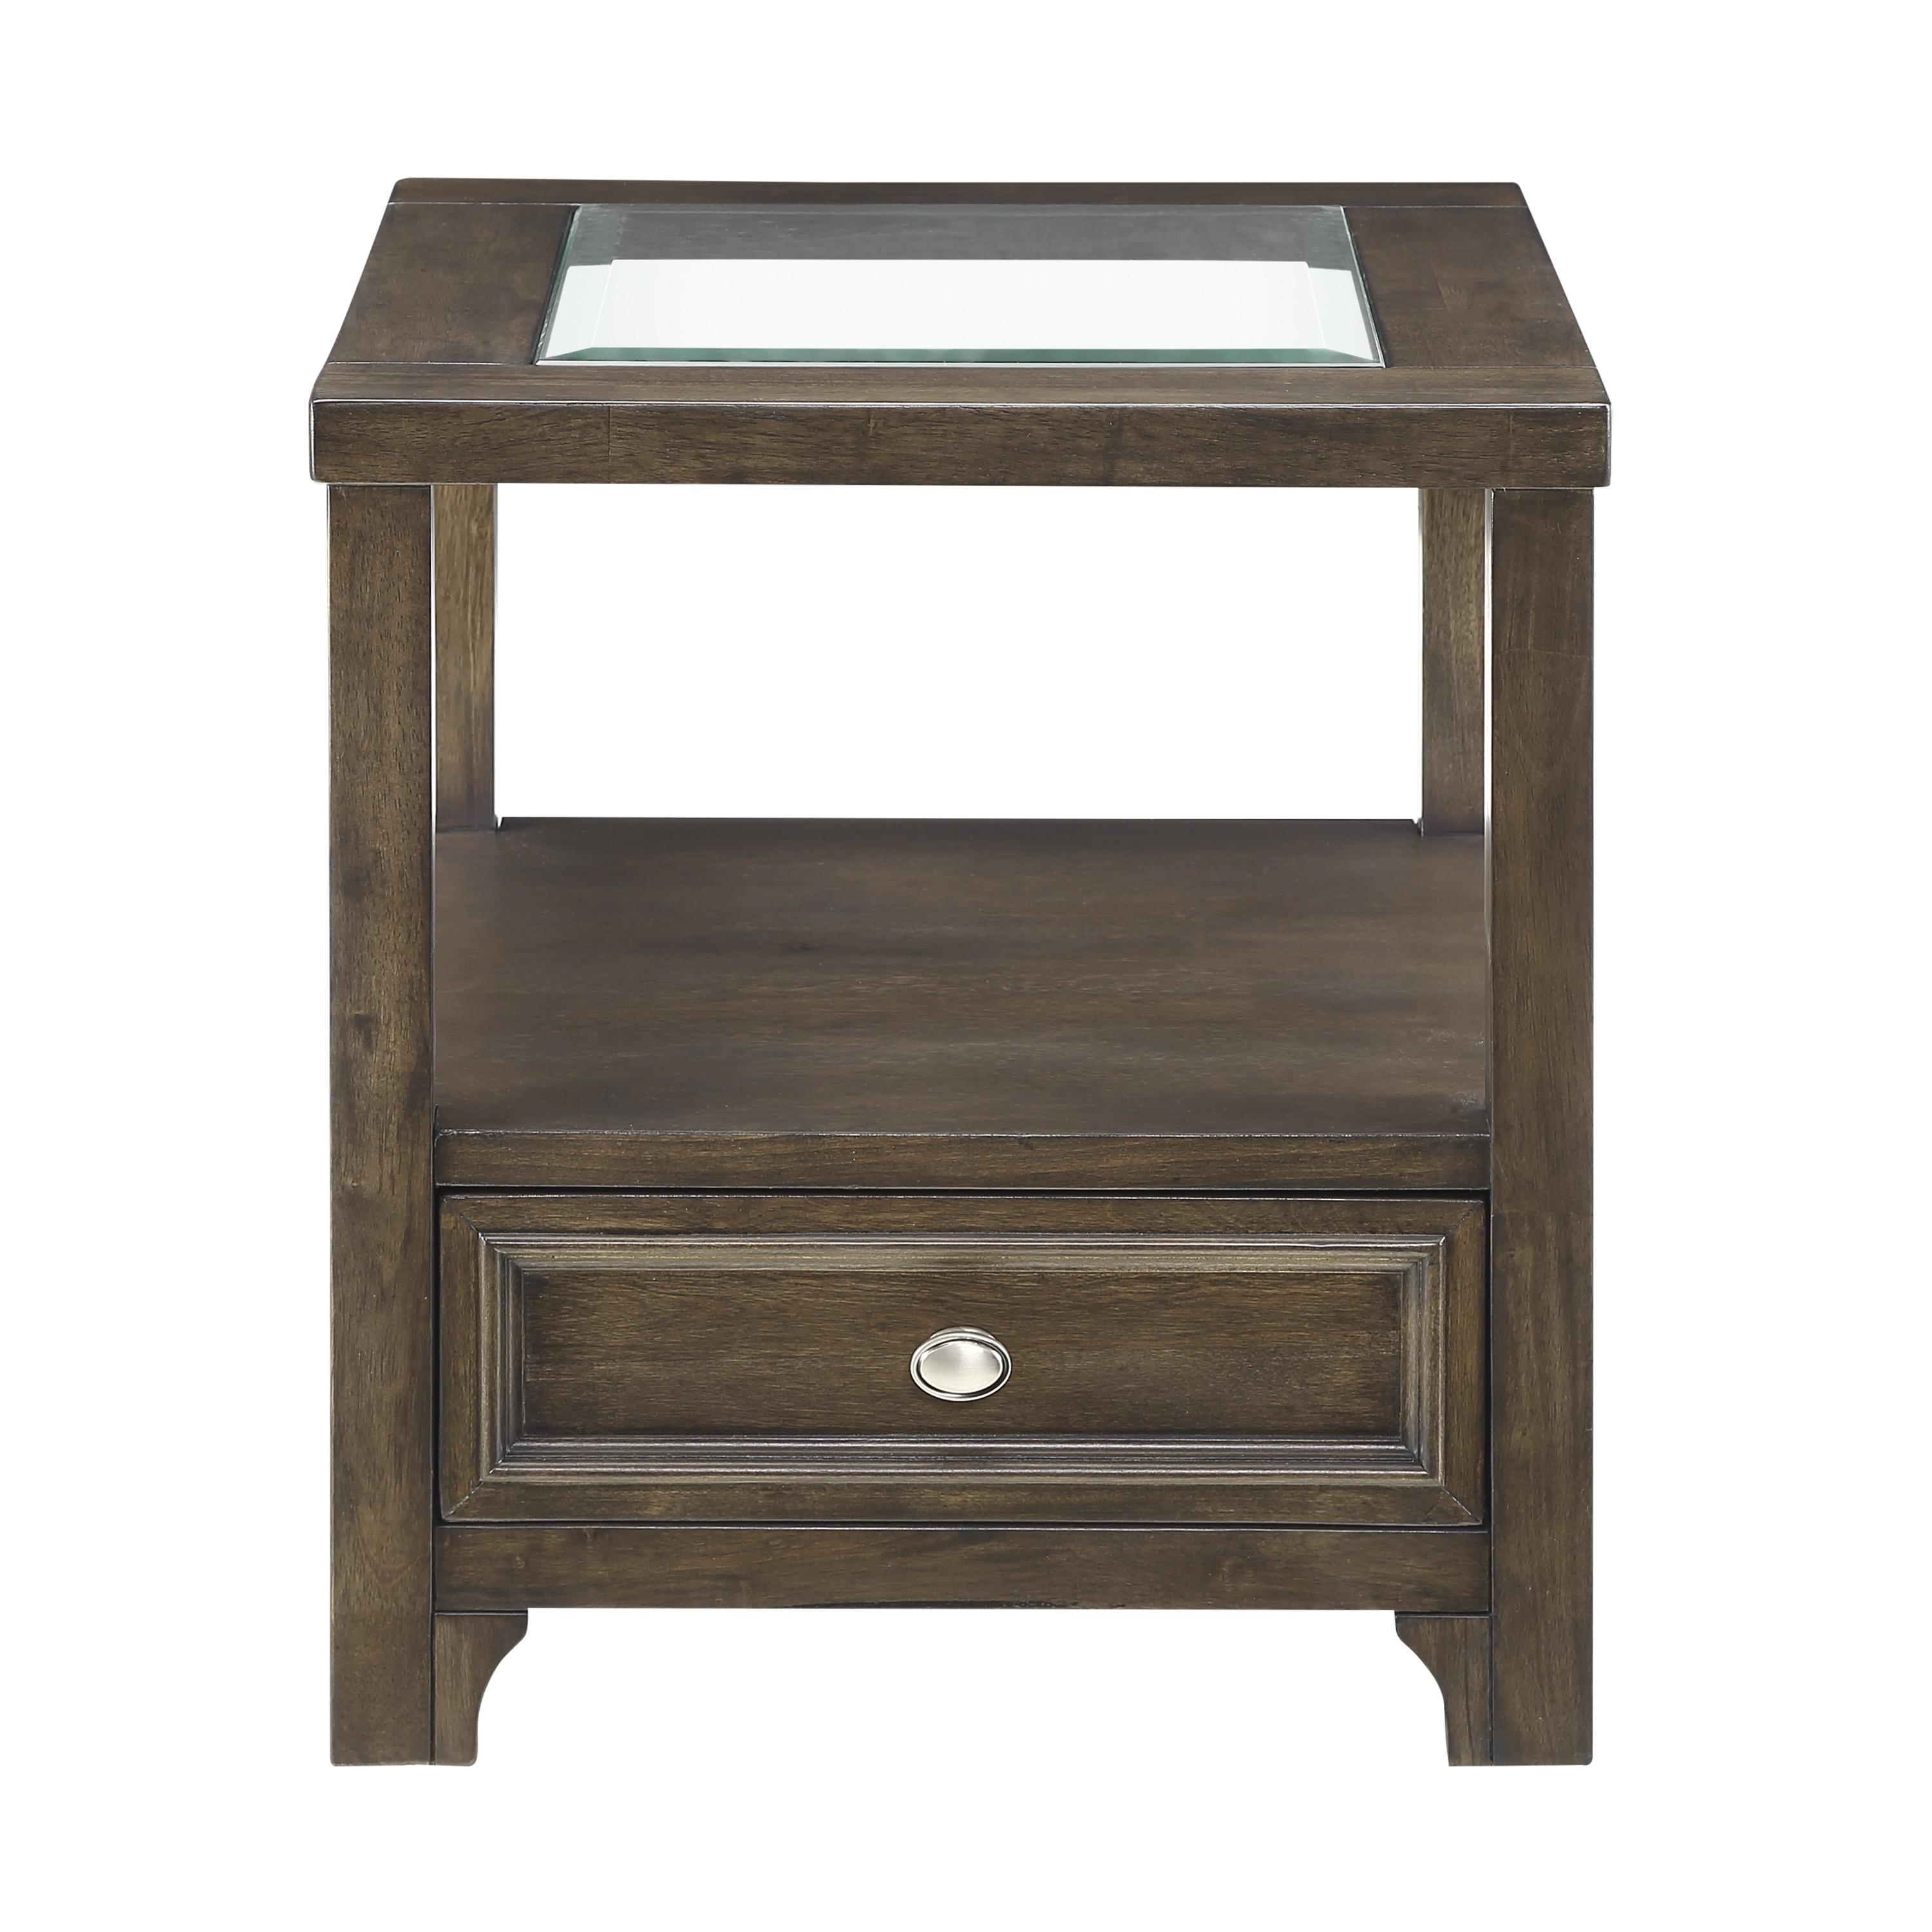 Transitional End Table 3624-04 Auburn 3624-04 in Brown 